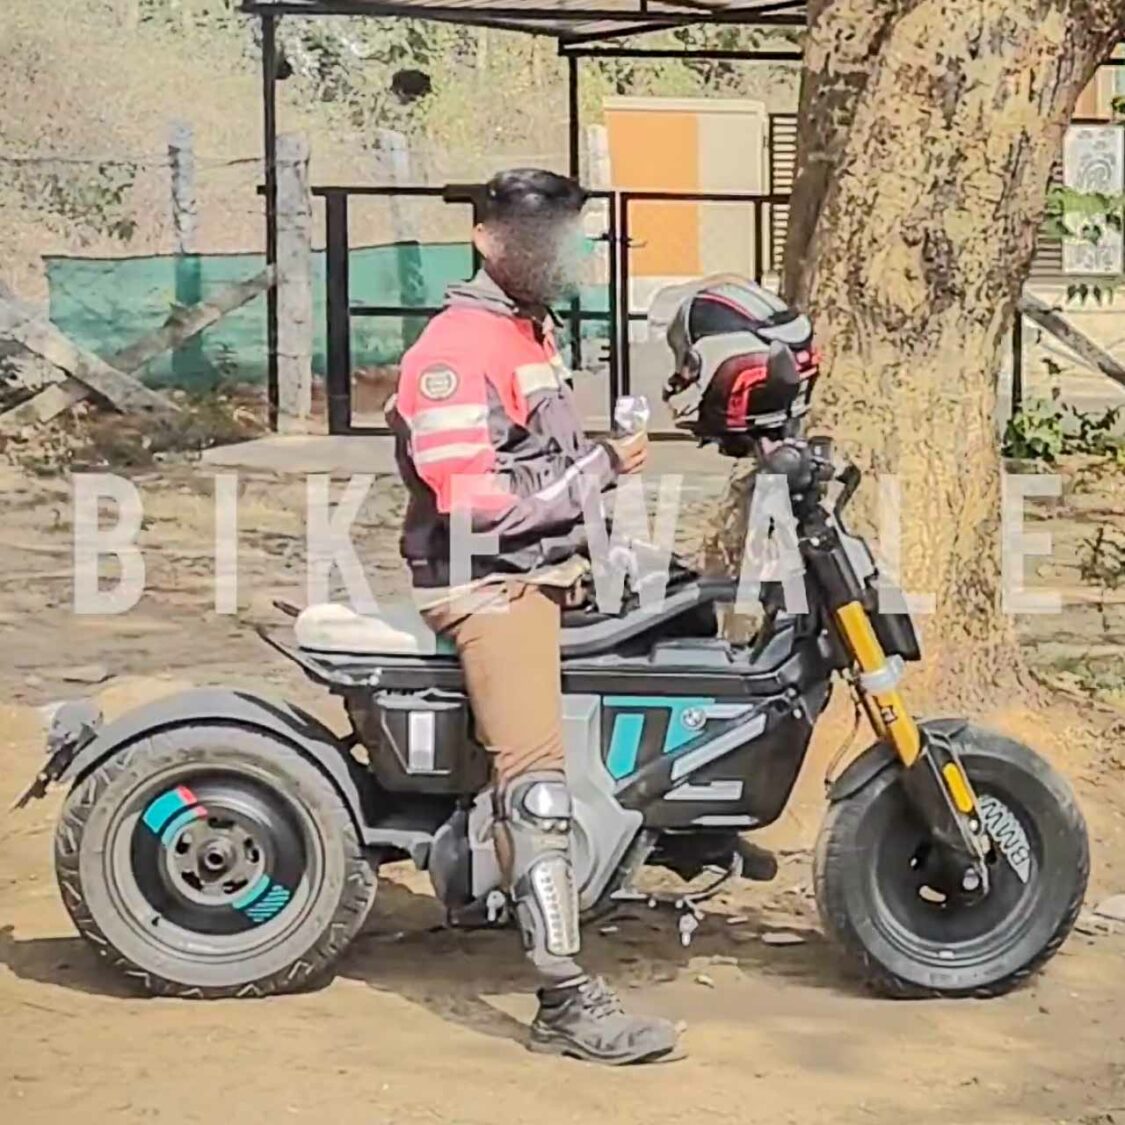 New BMW Electric Scooter for India - Spied